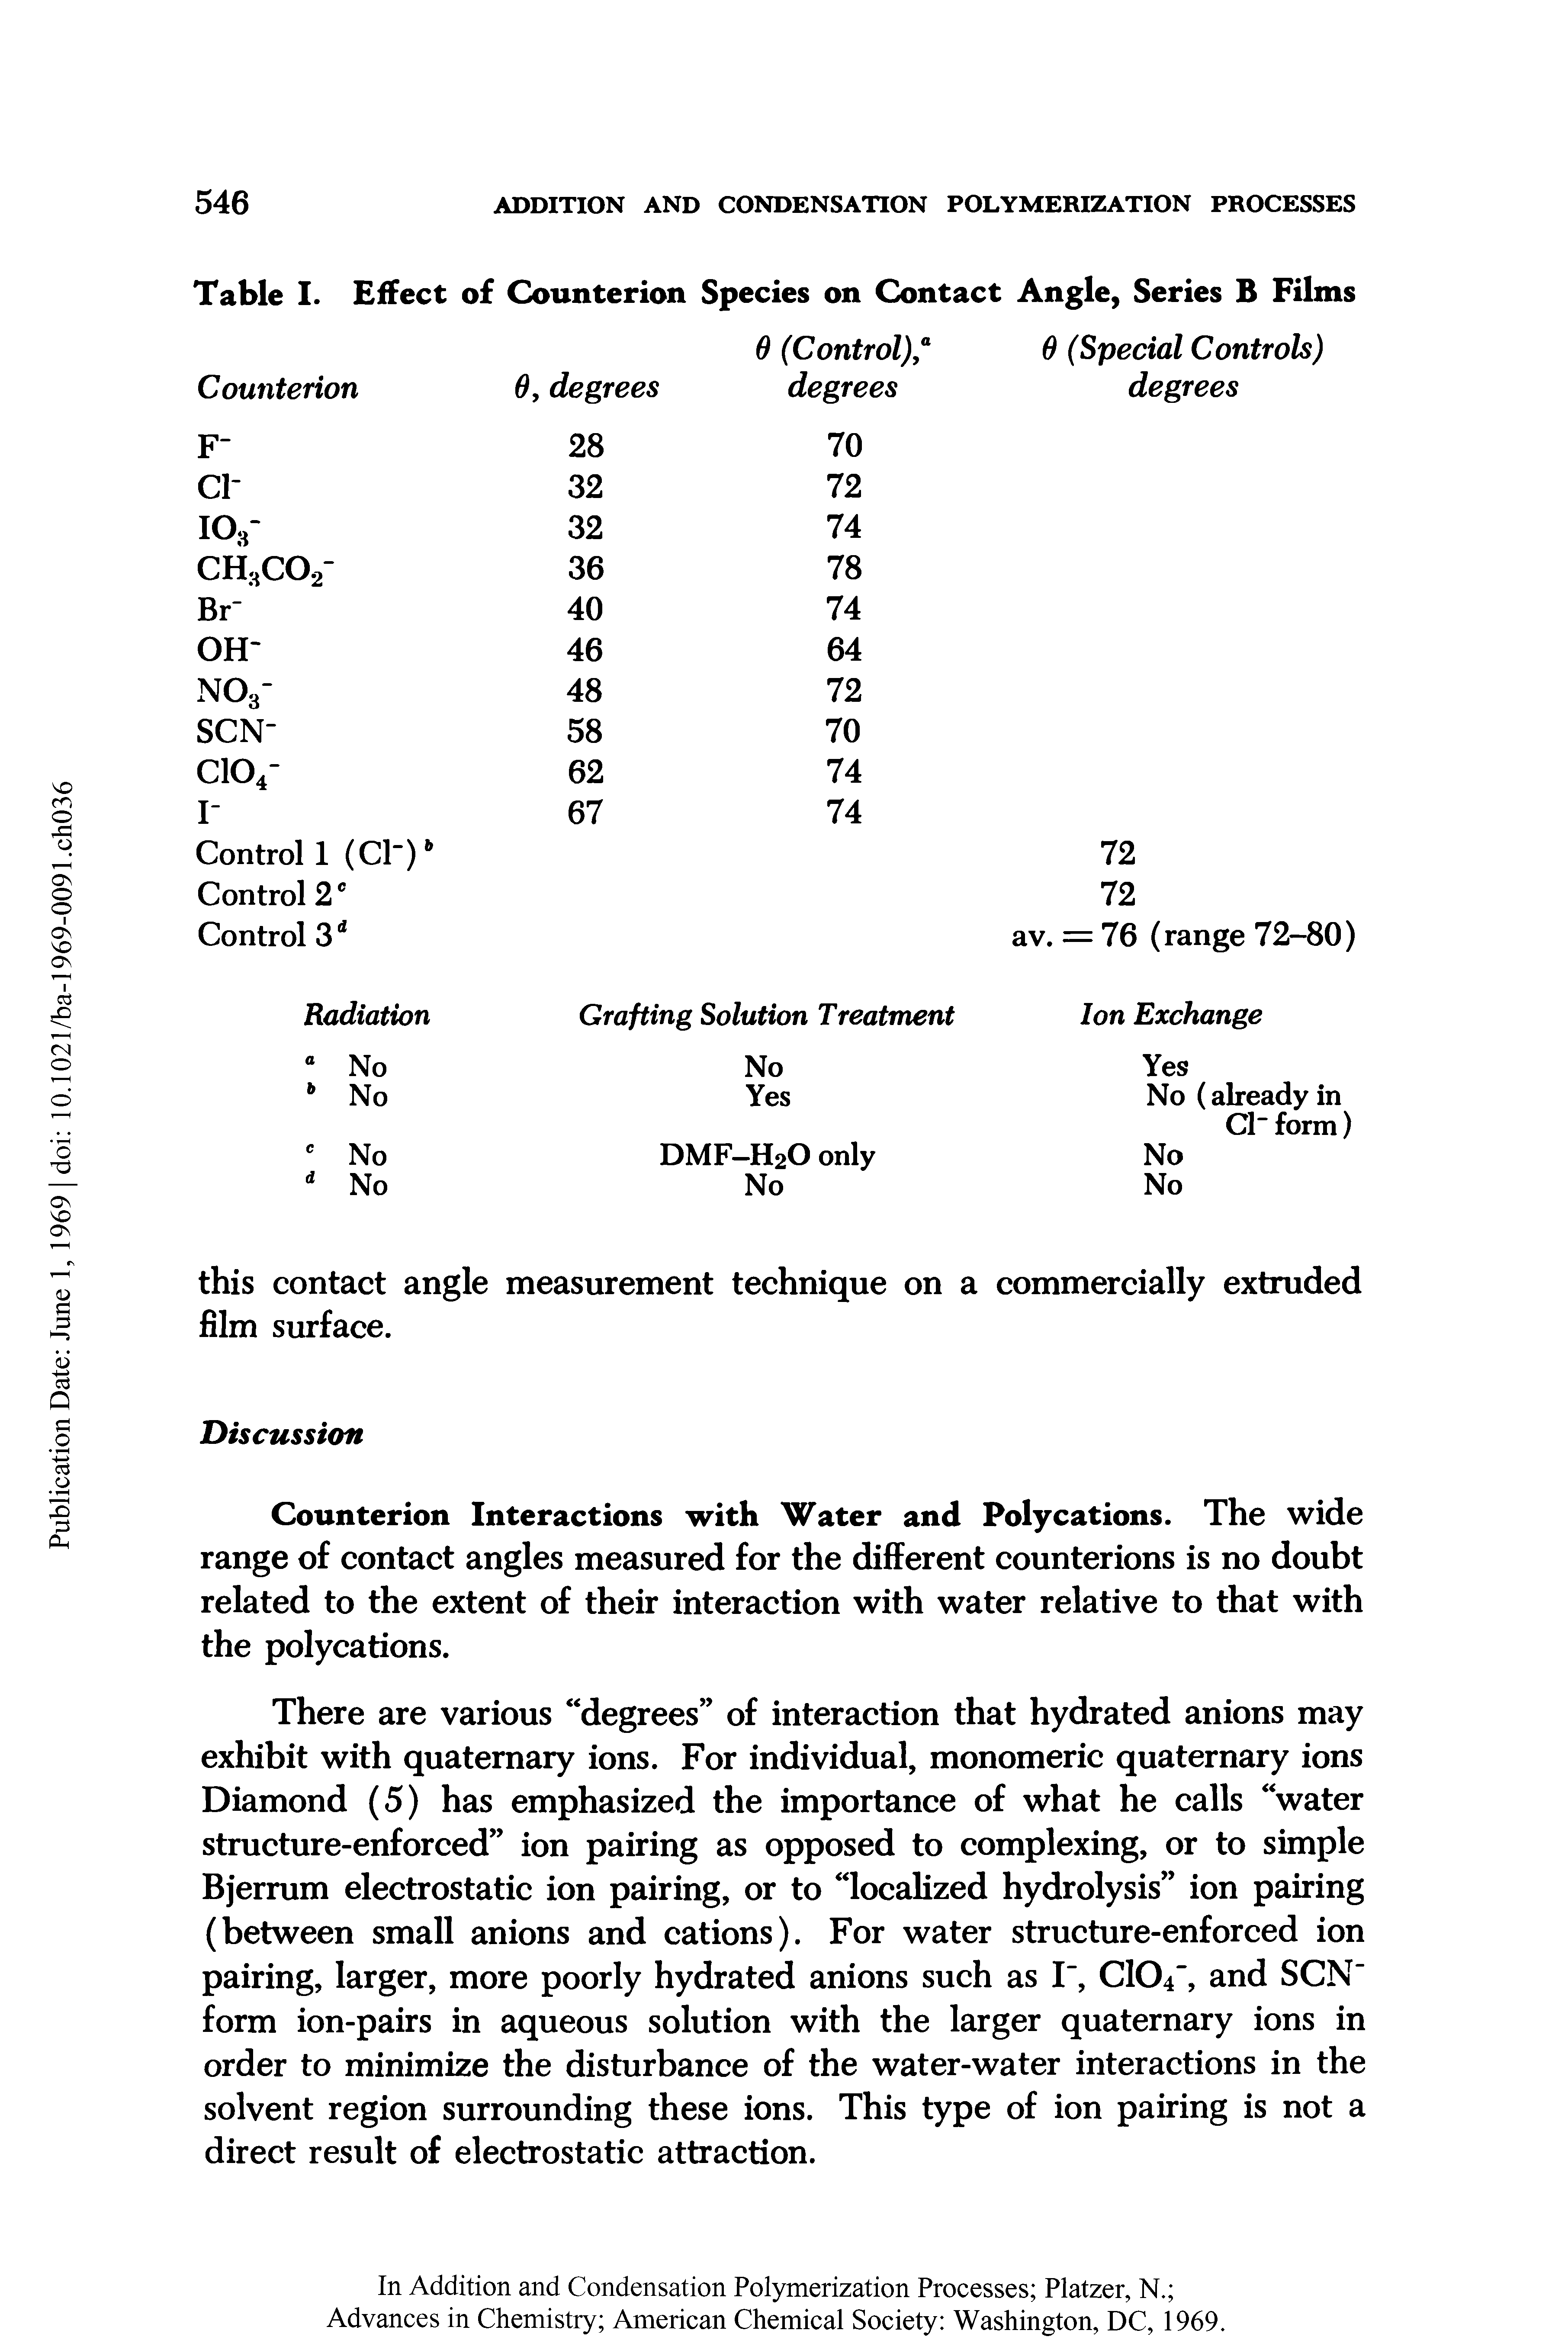 Table I. Effect of Counterion Species on Contact Angle, Series B Films...